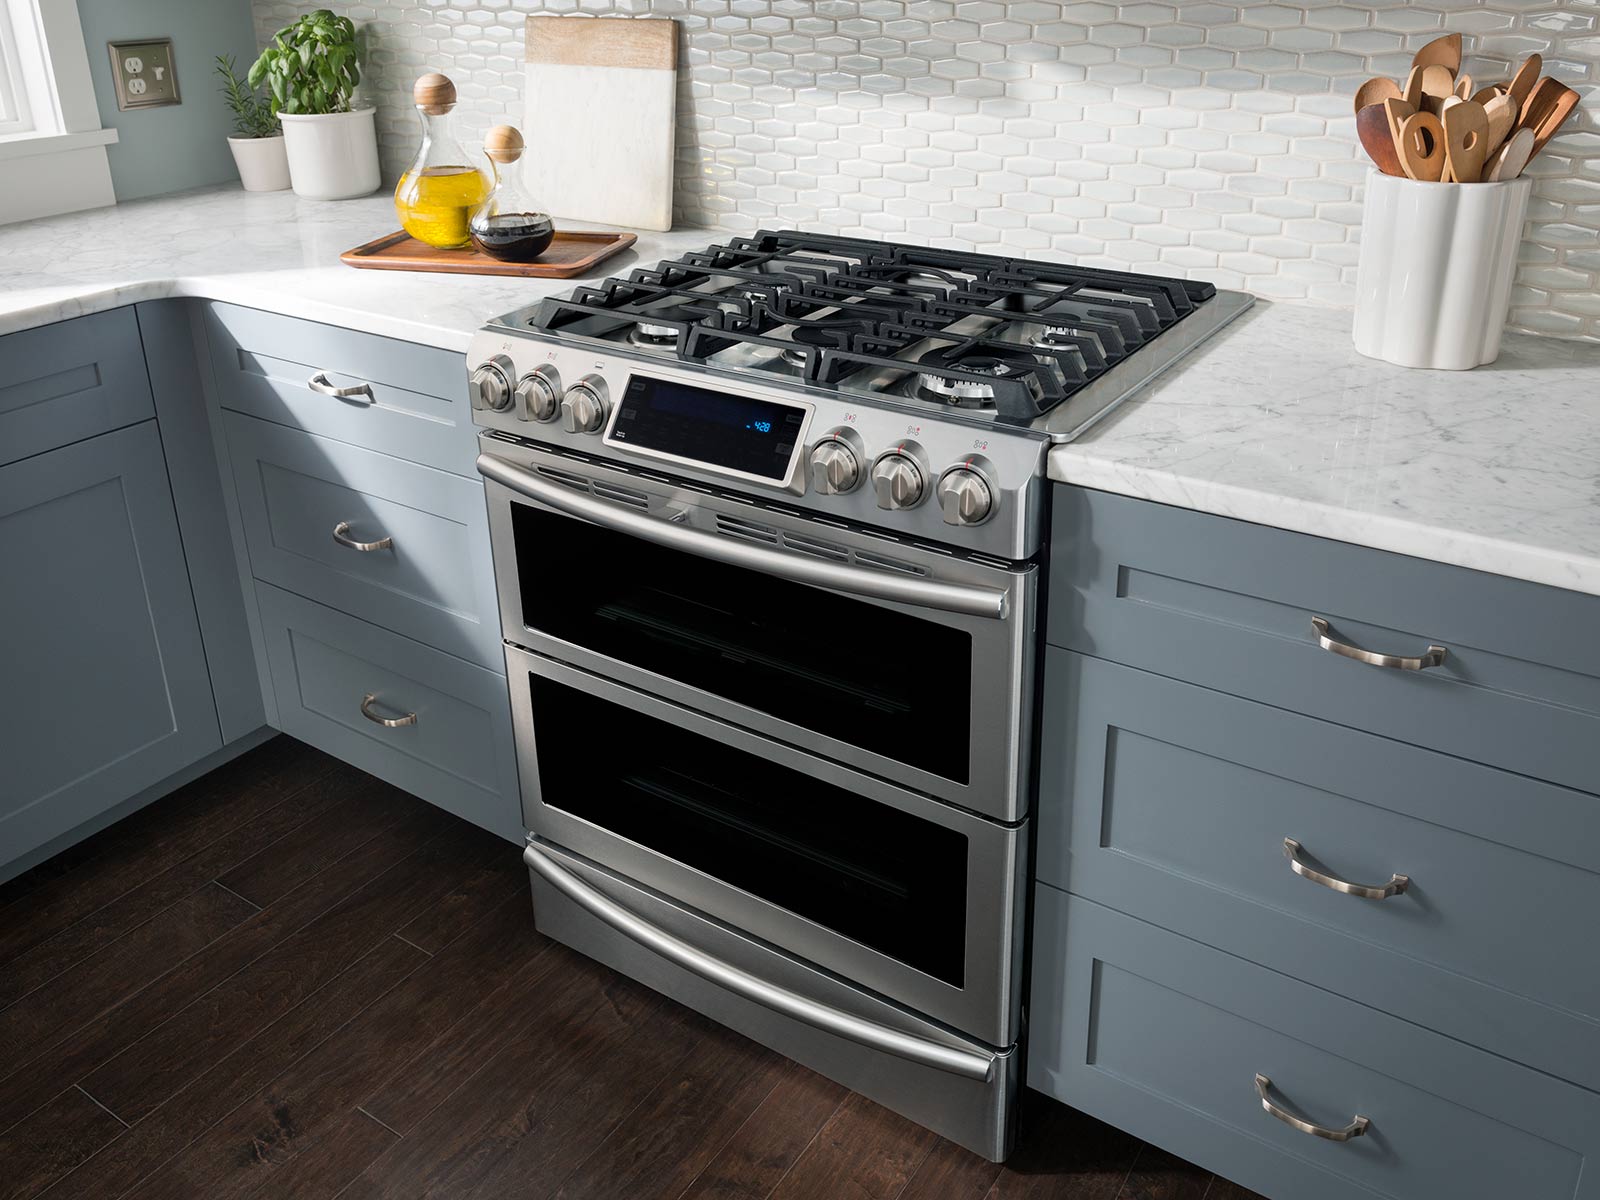 Best Buy: Wolf 5.8 Cu. Ft. Freestanding Double Oven Gas Convection